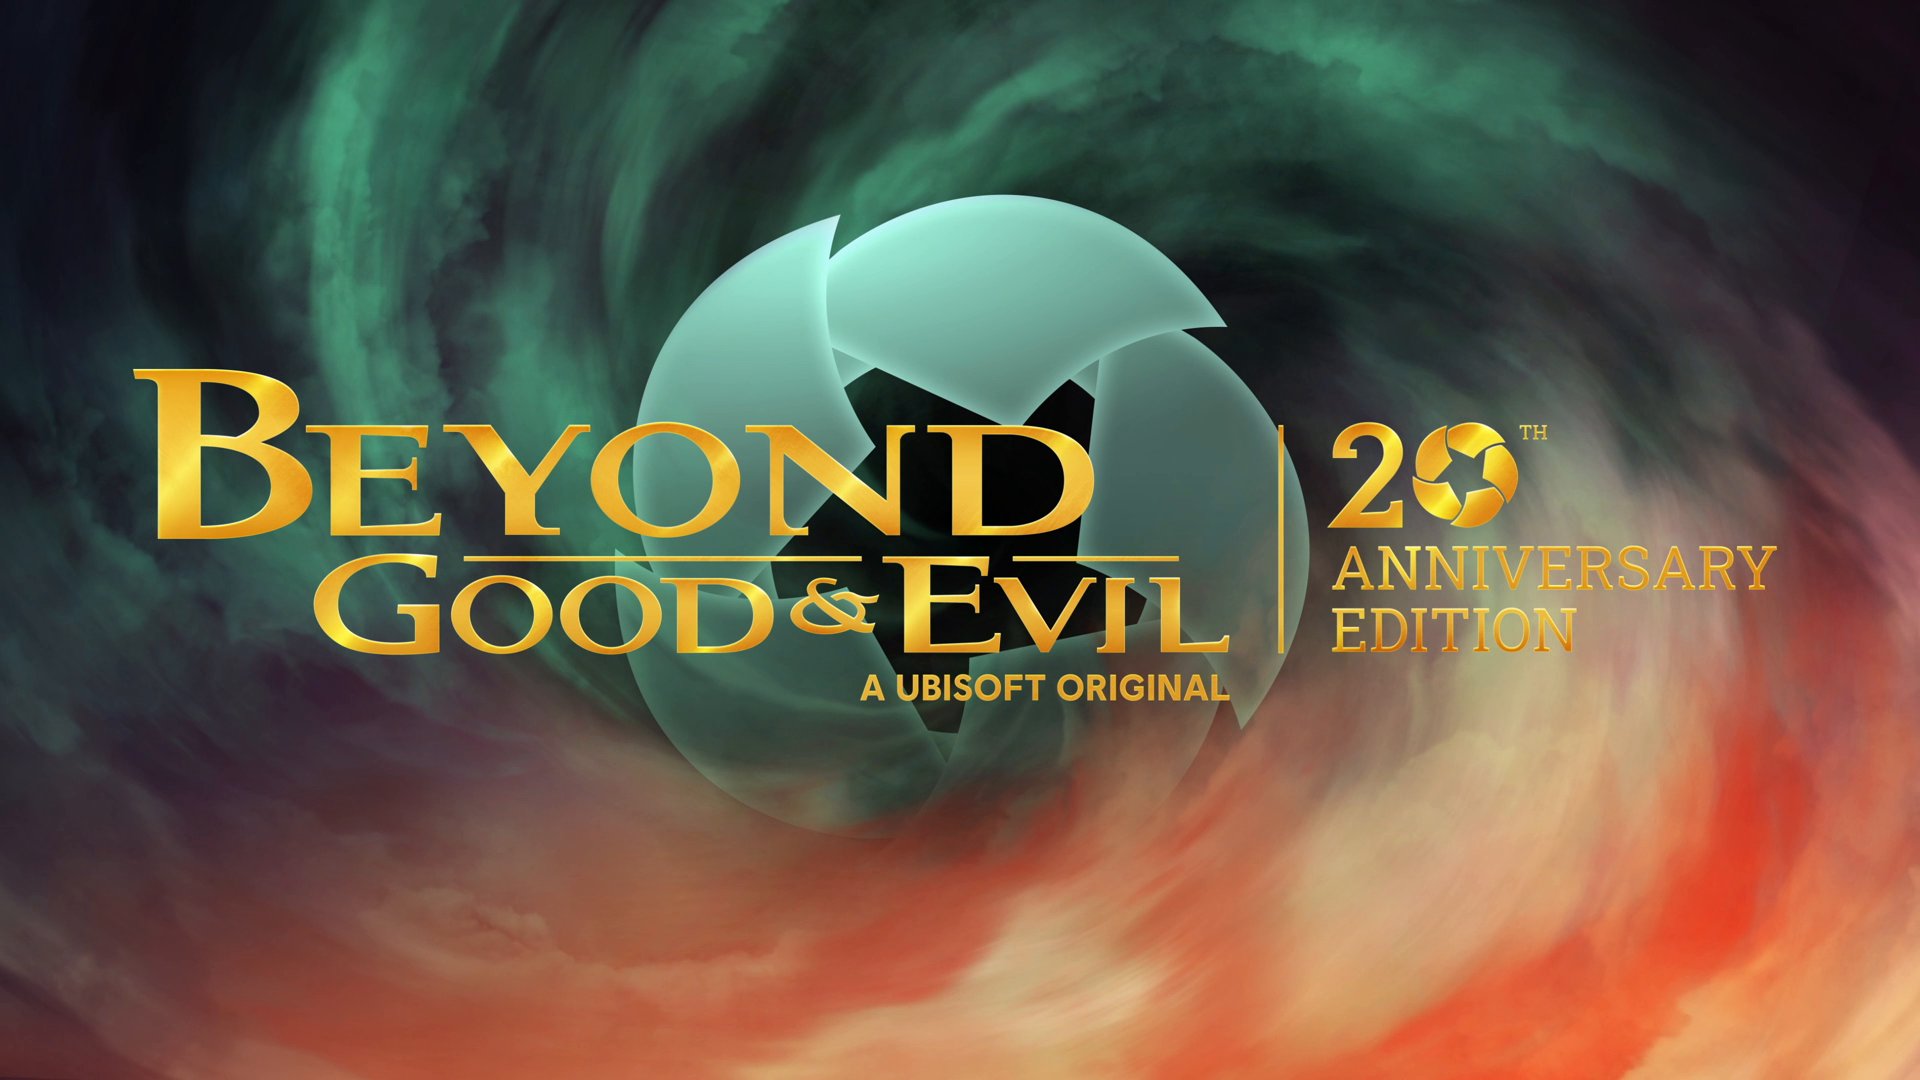 Beyond Good & Evil 20th Anniversary Edition releases on June 25 for PS5, Xbox Series, PS4, Xbox One, Switch and PC